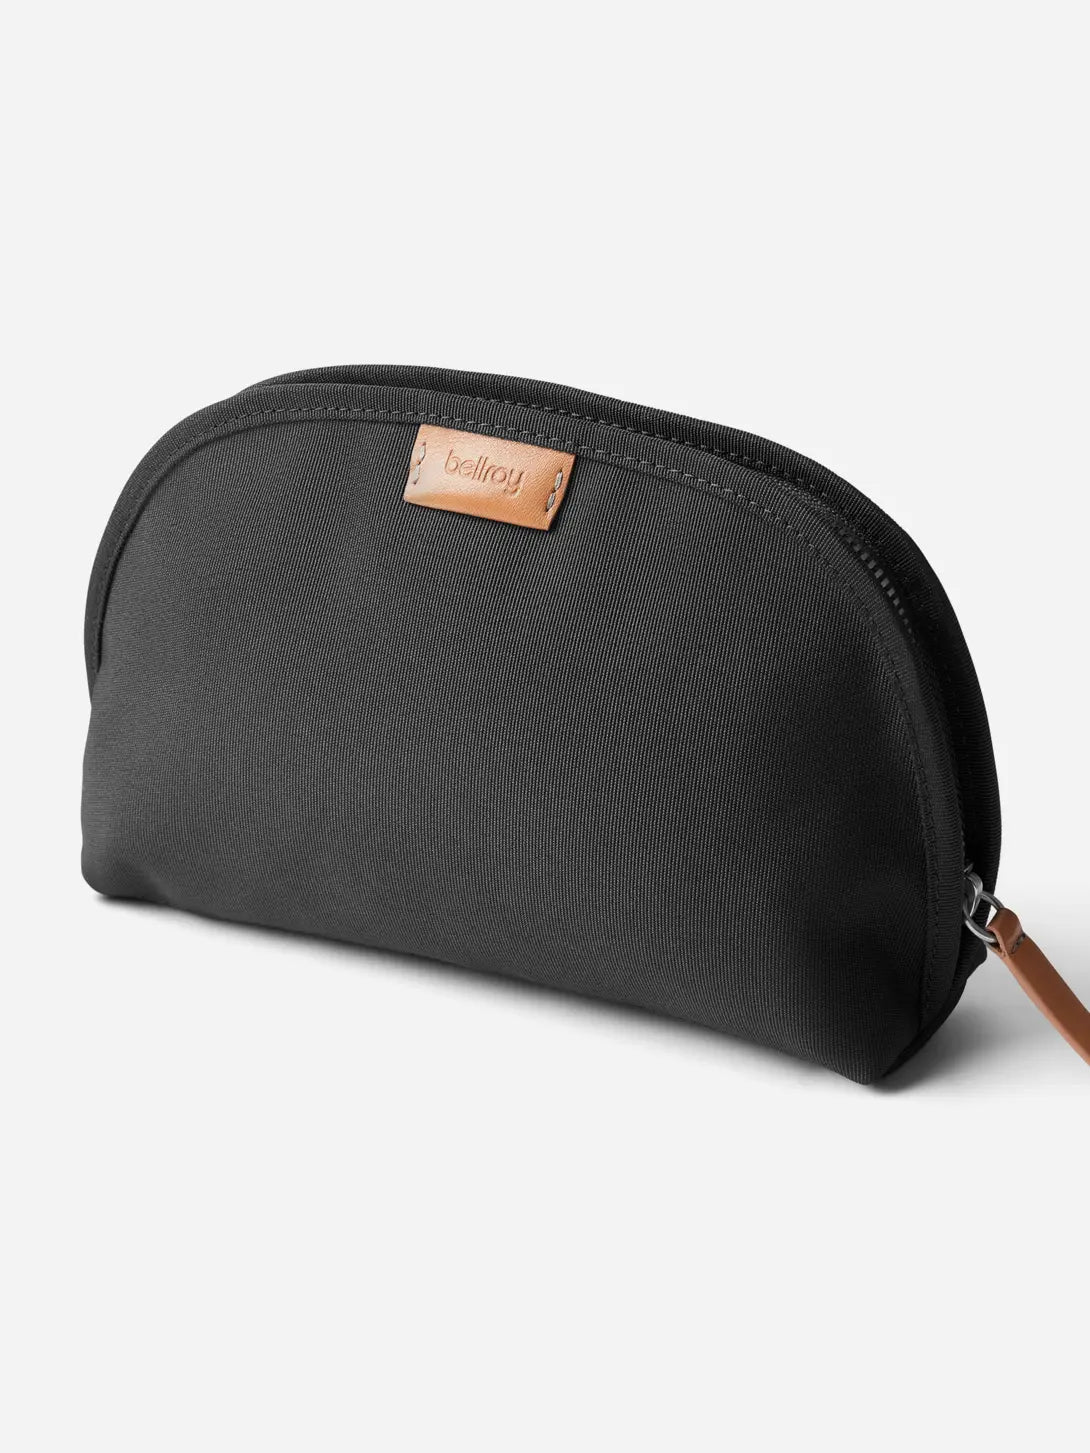 Slate Bellroy Classic Pouch